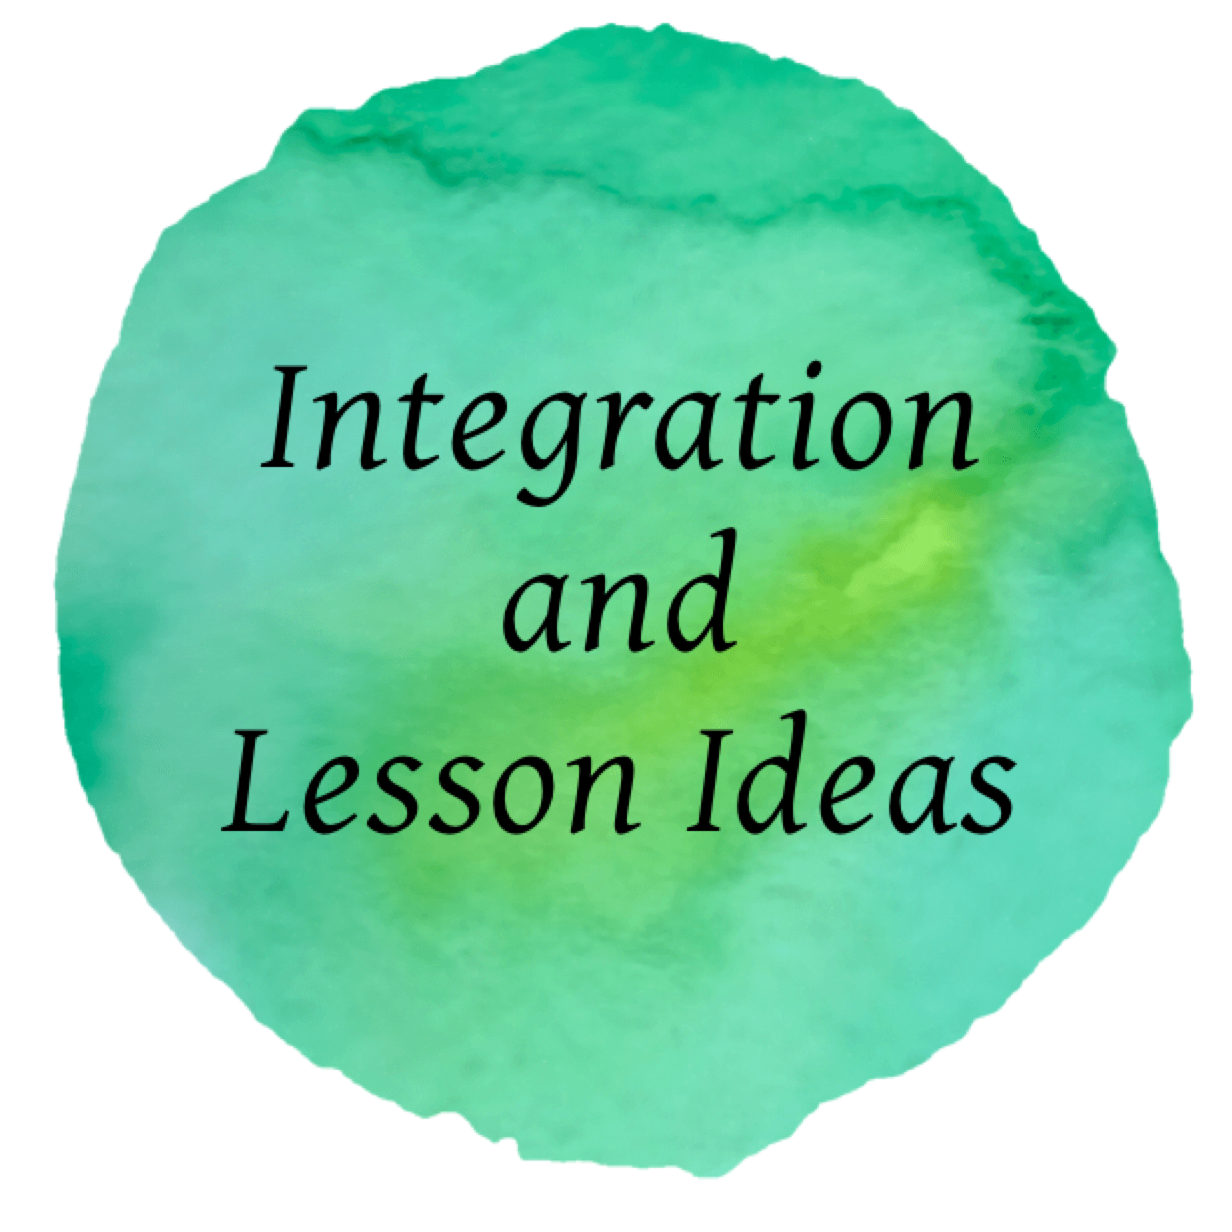 Integration and Lesson Ideas